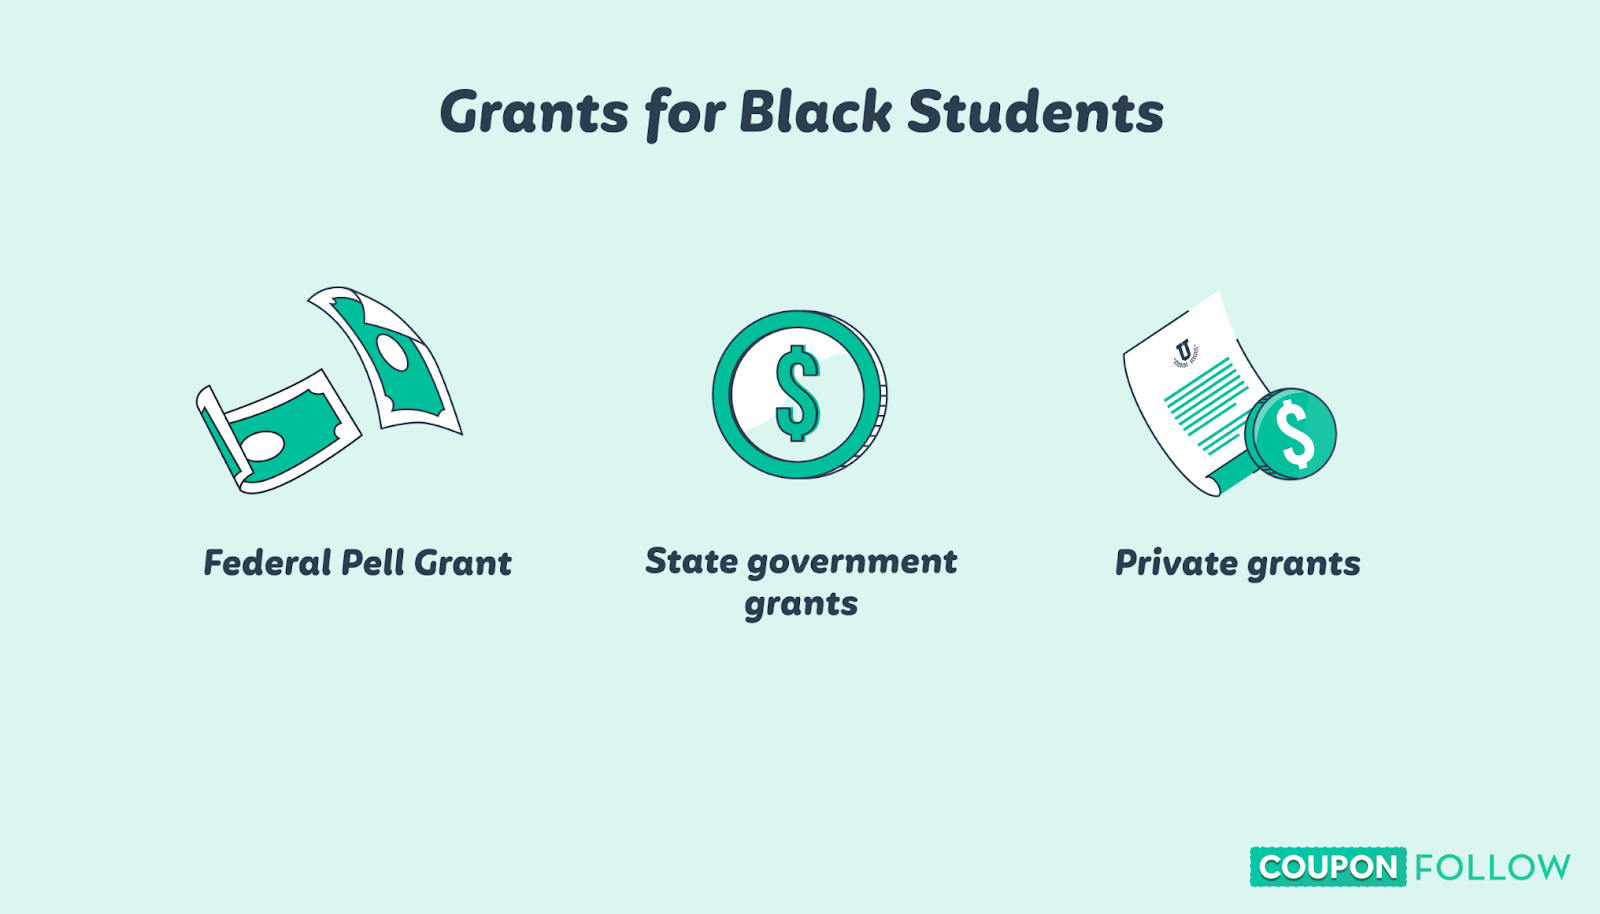 a list of grants for Black students